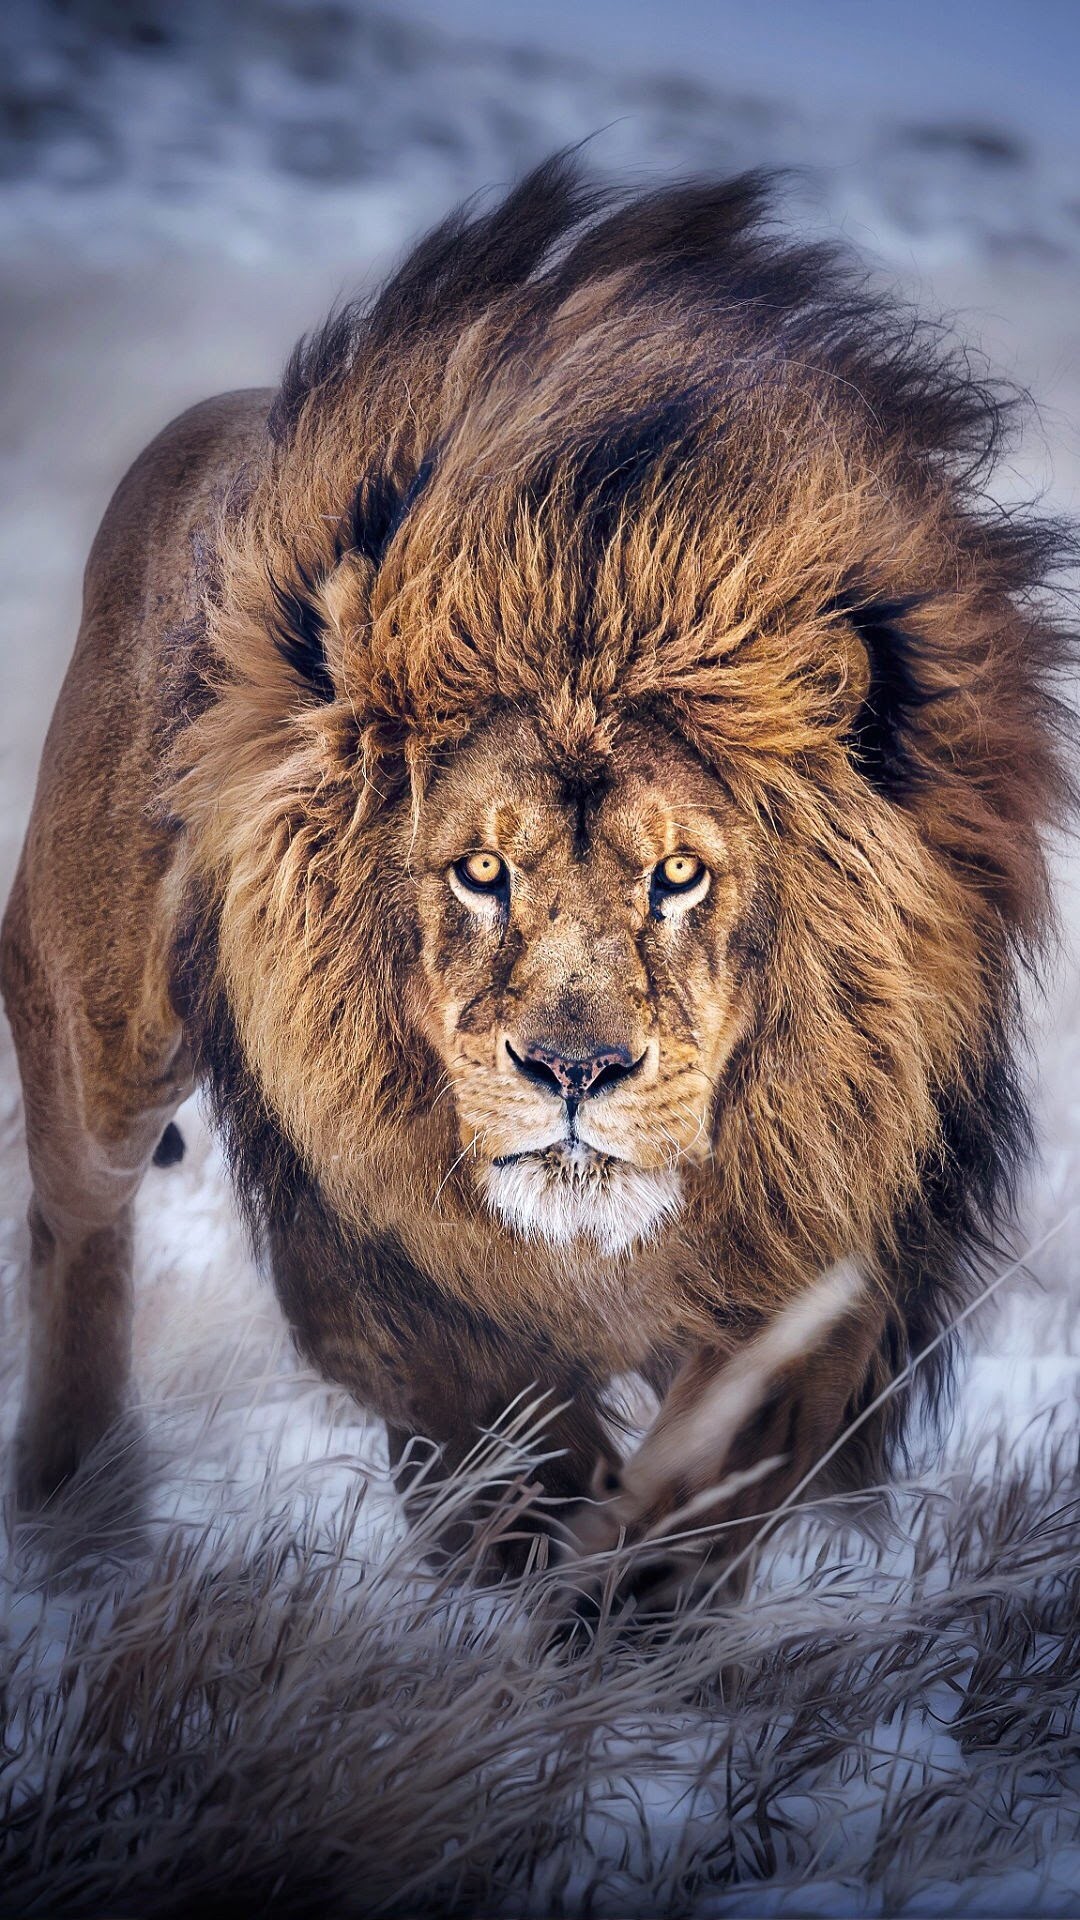 1080x1920 Lion wallpaper for iPhone. iPhone 6